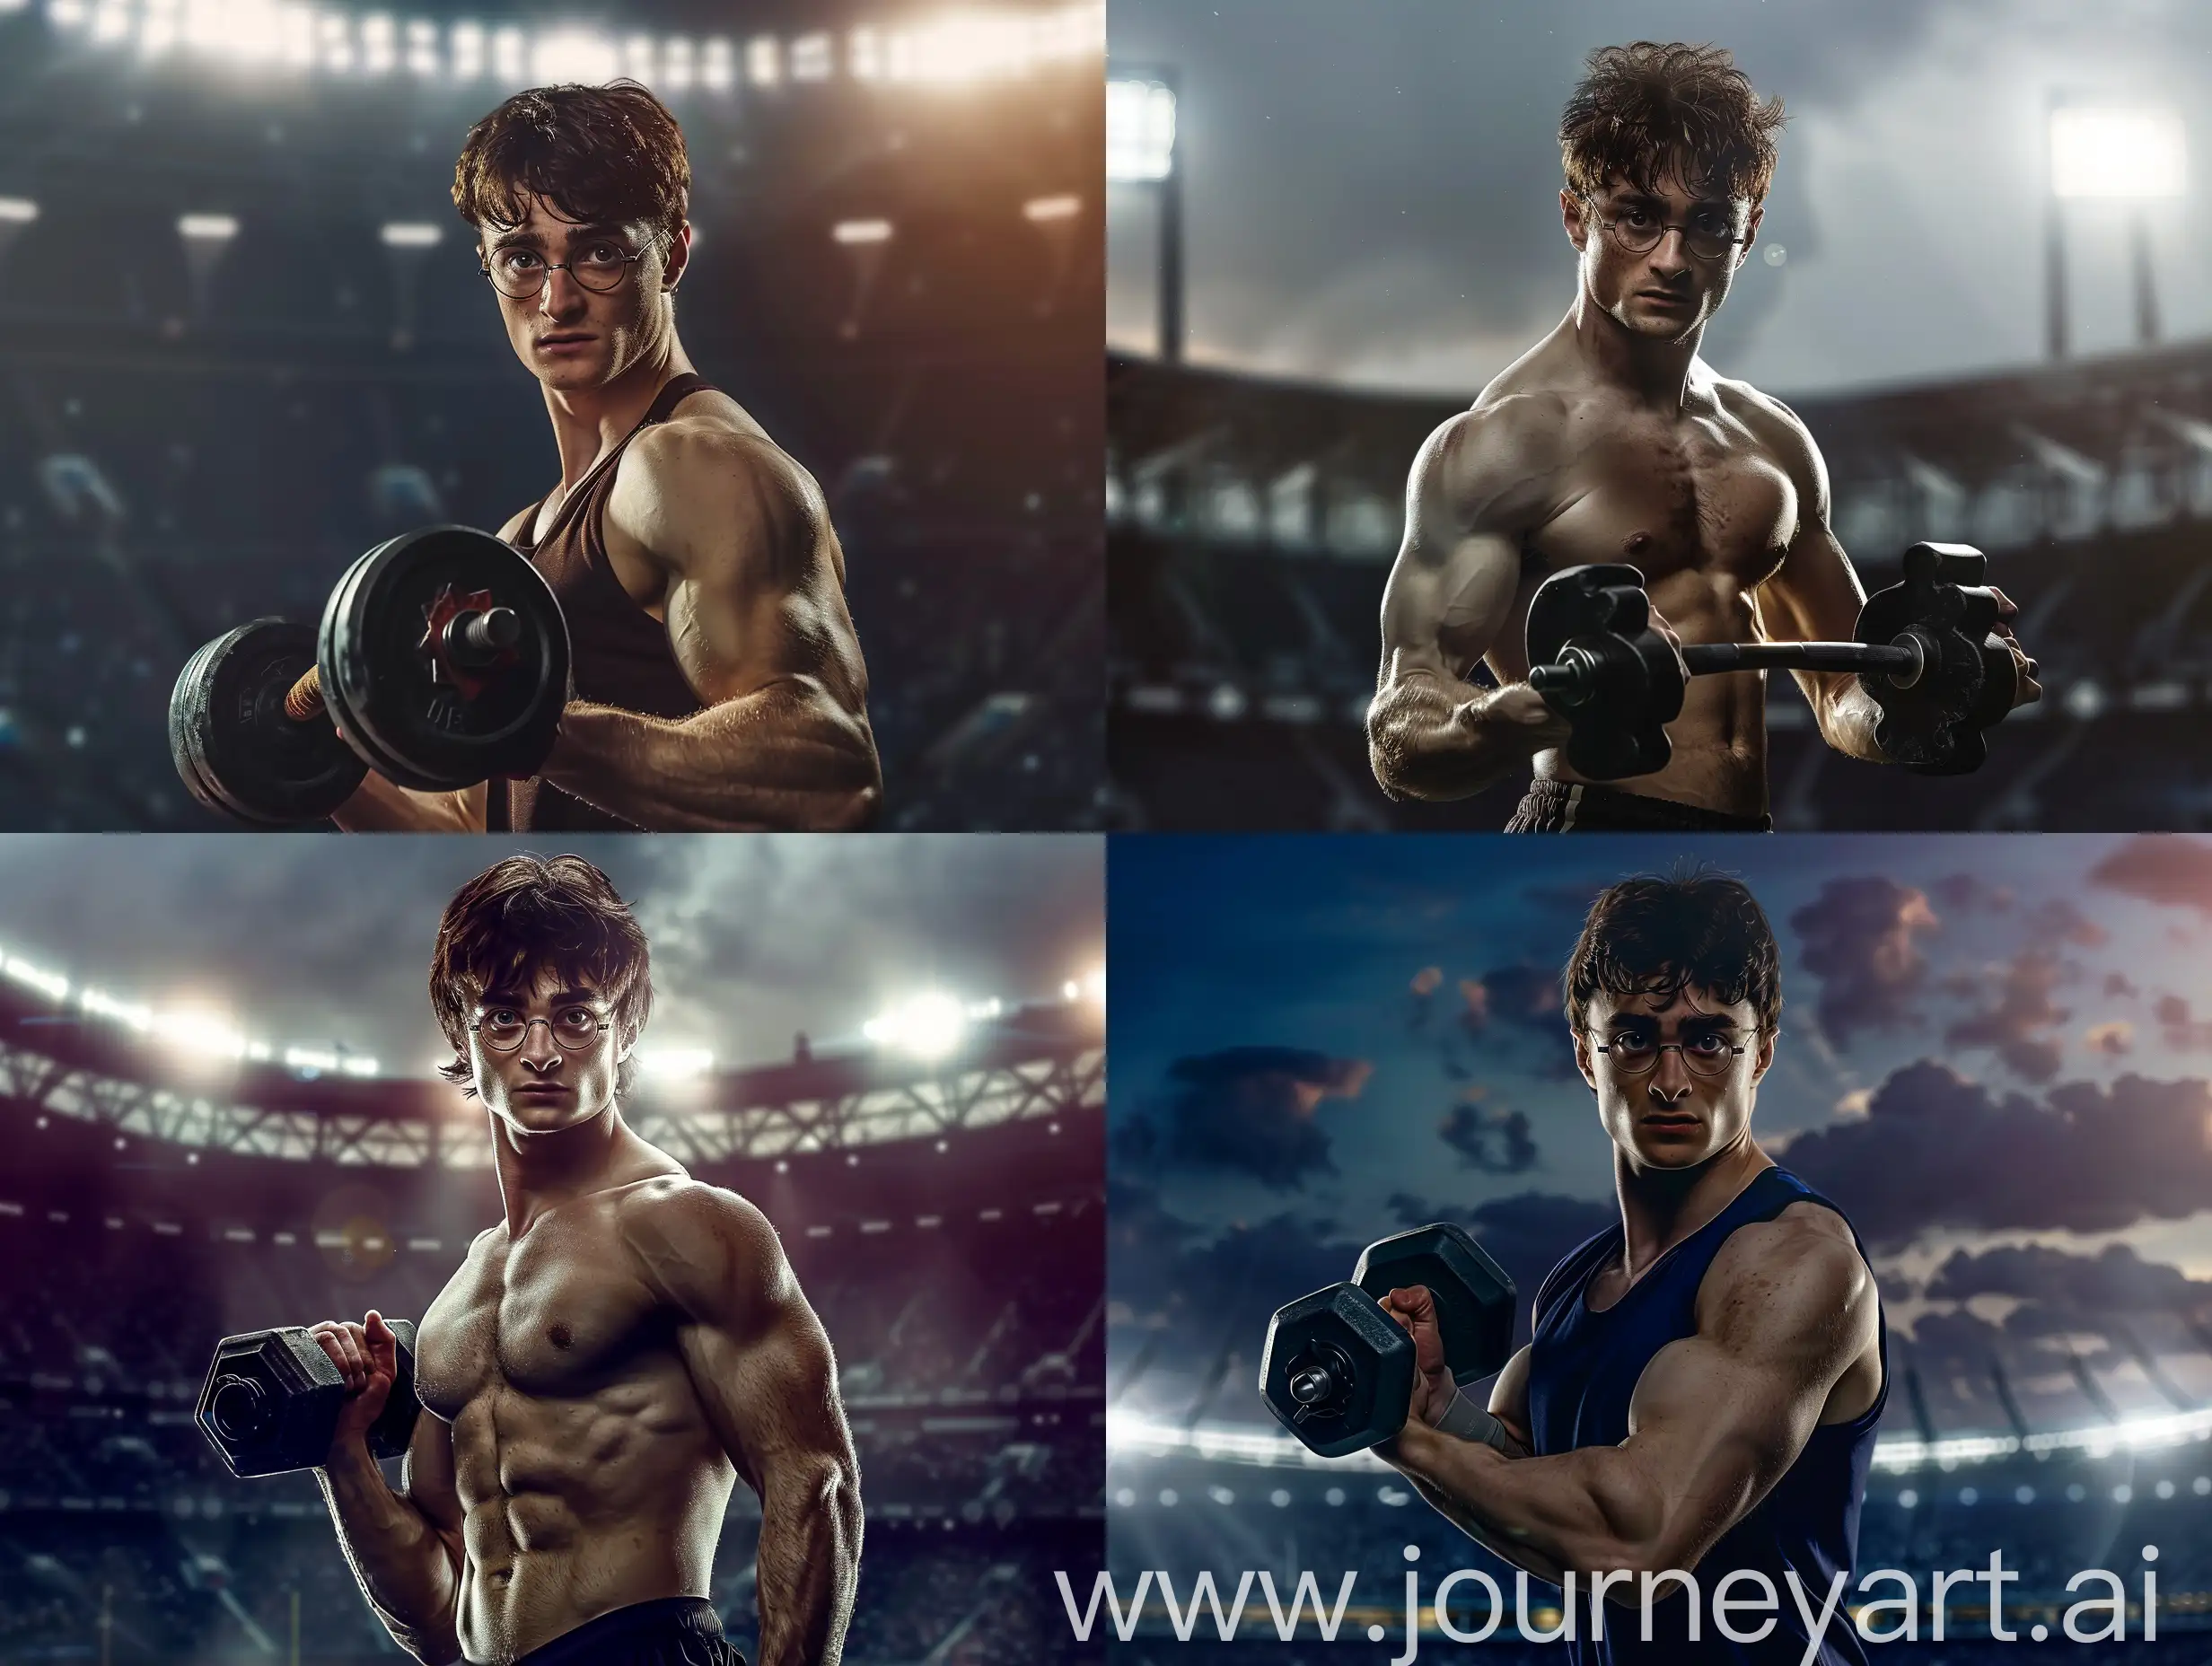 Harry Potter character from Harry Potter movie,
fit and muscular in sportswear lifting weights muscular body looking at camera wizards stadium background realistic lighting cinematic q2